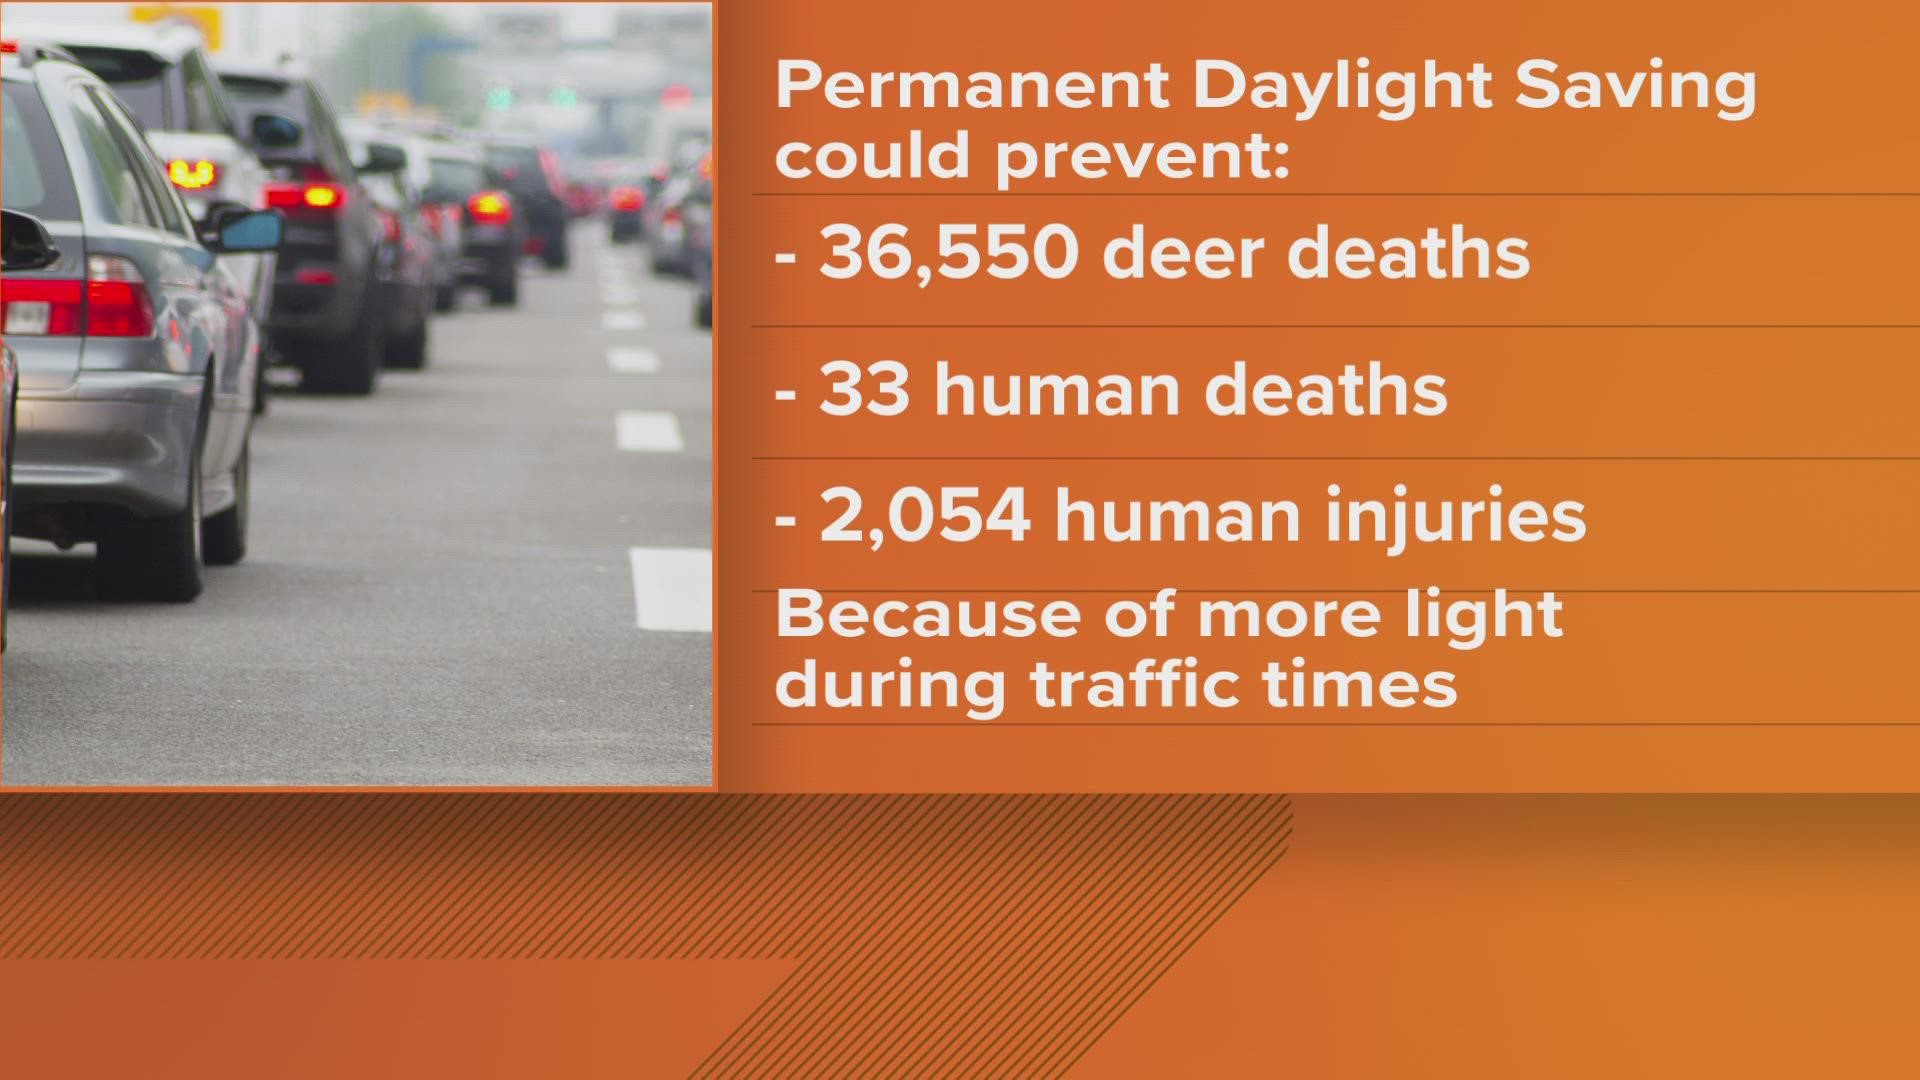 A new study shows a permanent Daylight Saving Time would prevent help prevent deer vs. car crashes.